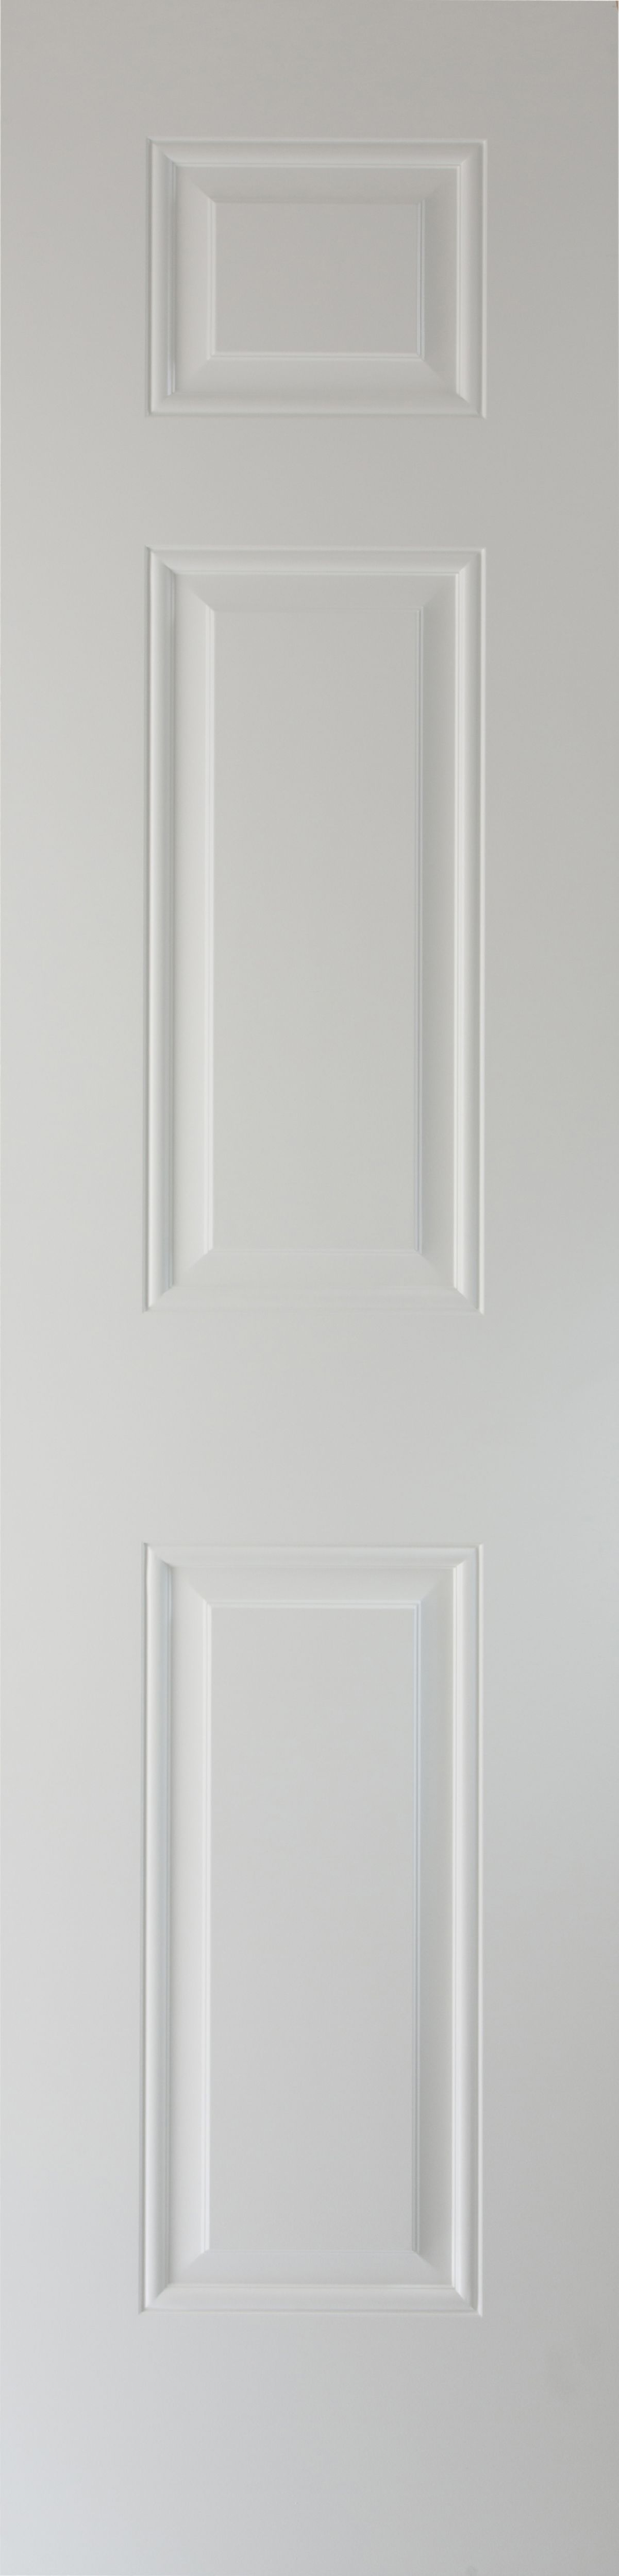 Freedom 3 panel Patterned Unglazed Contemporary White Internal Door, (H)1981mm (W)457mm (T)35mm